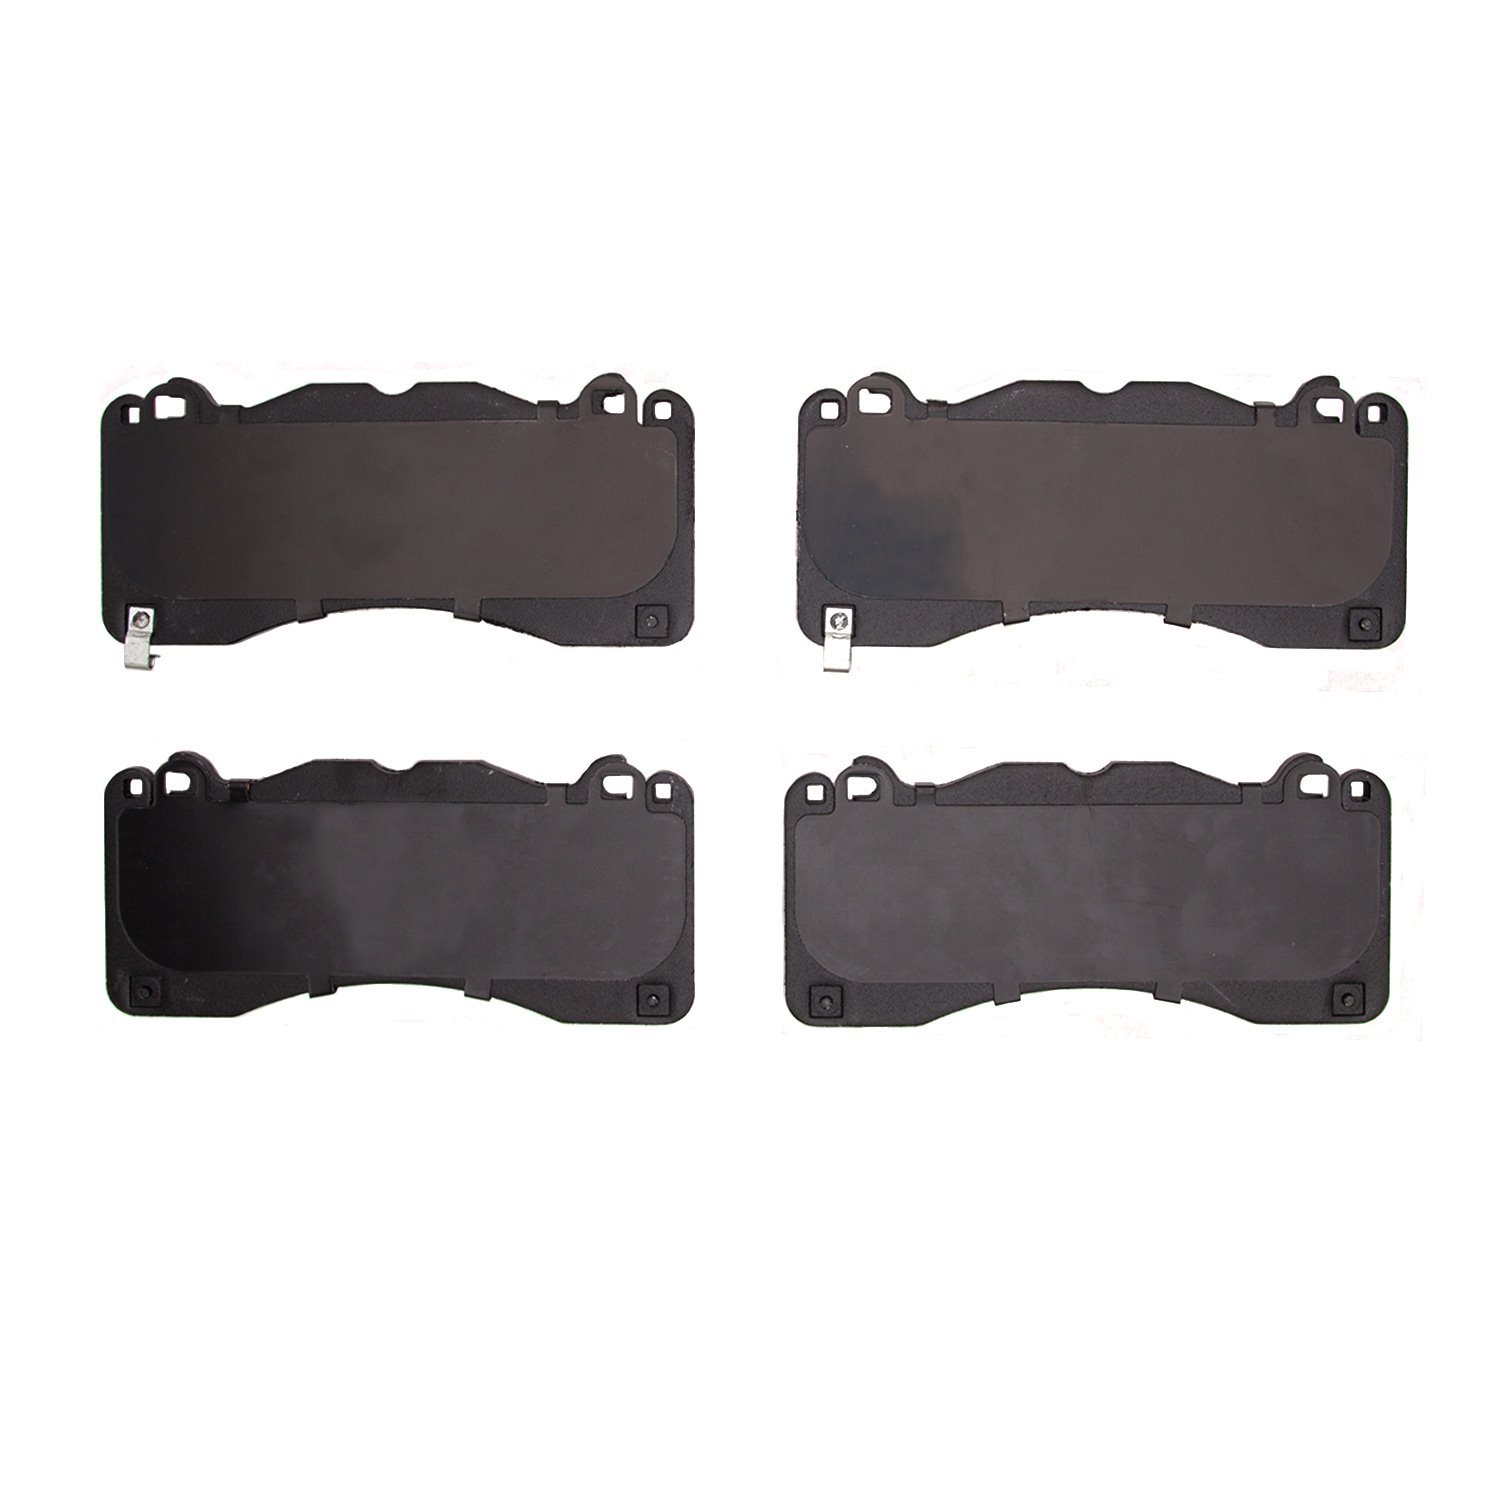 1000-1792-00 Track/Street Low-Metallic Brake Pads Kit, Fits Select Ford/Lincoln/Mercury/Mazda, Position: Front